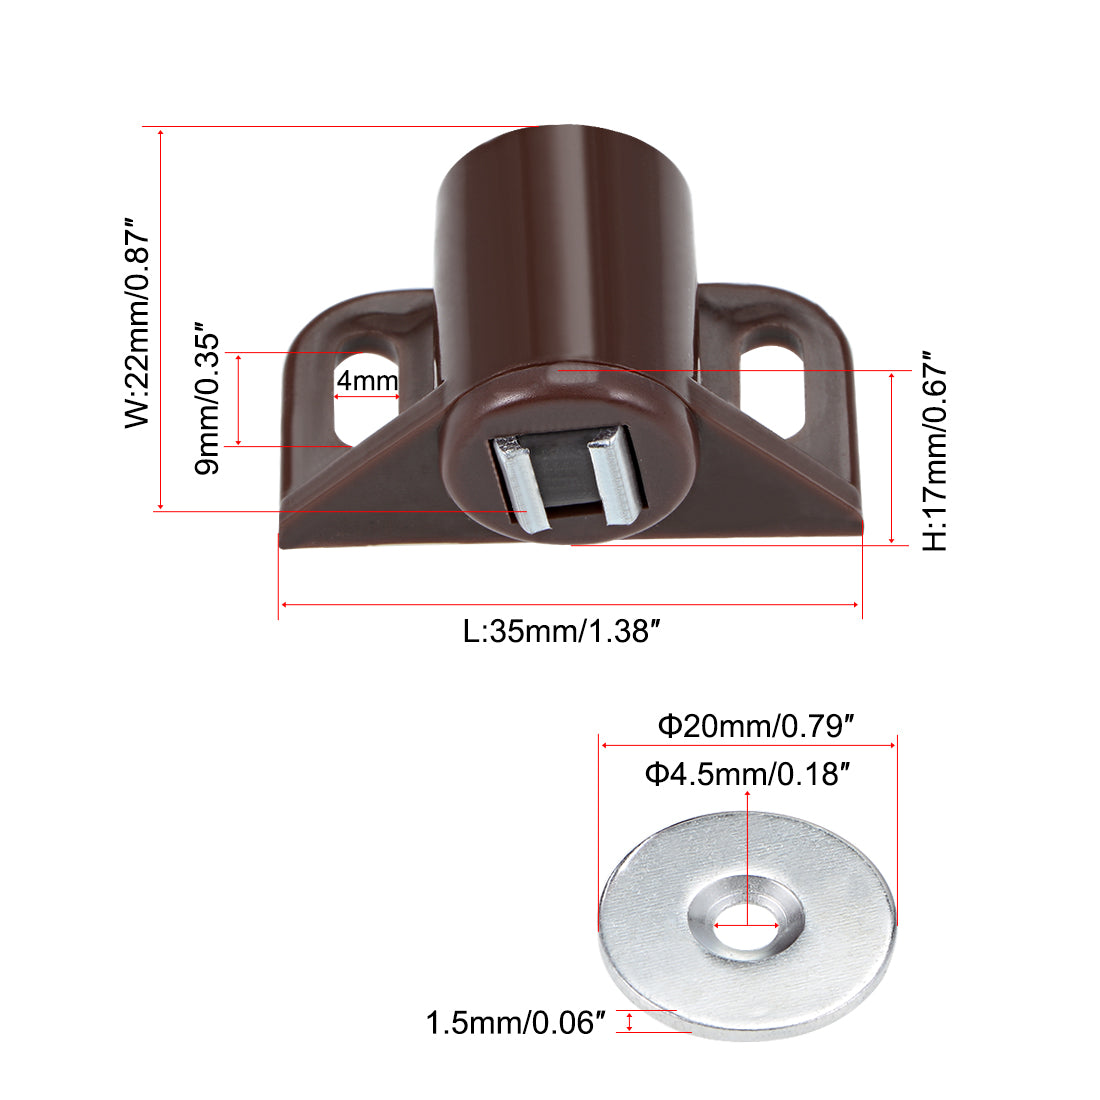 uxcell Uxcell Magnetic Latches Catch, Cabinet Door Magnet Latch for Cupboard Closet Brown 2pcs